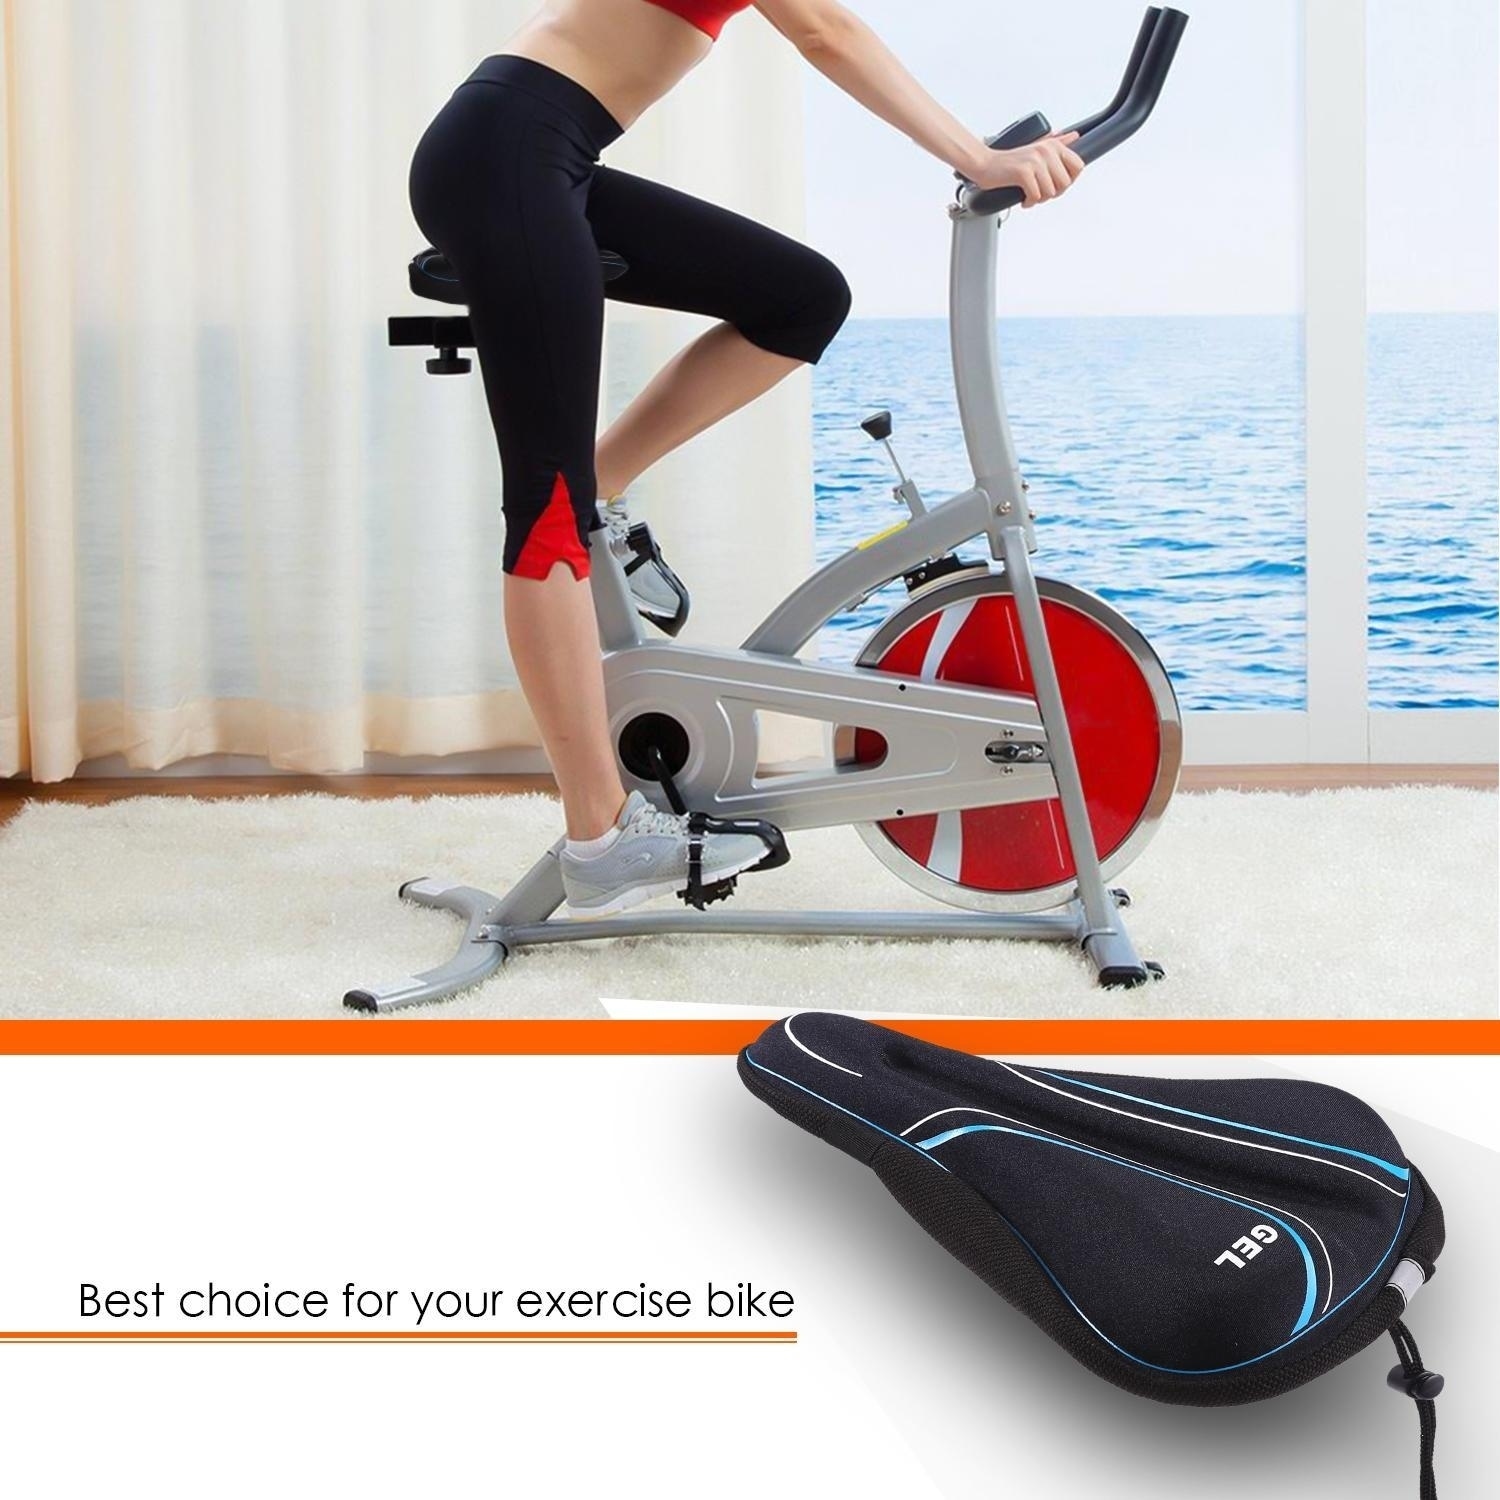 soft seat cover for exercise bike